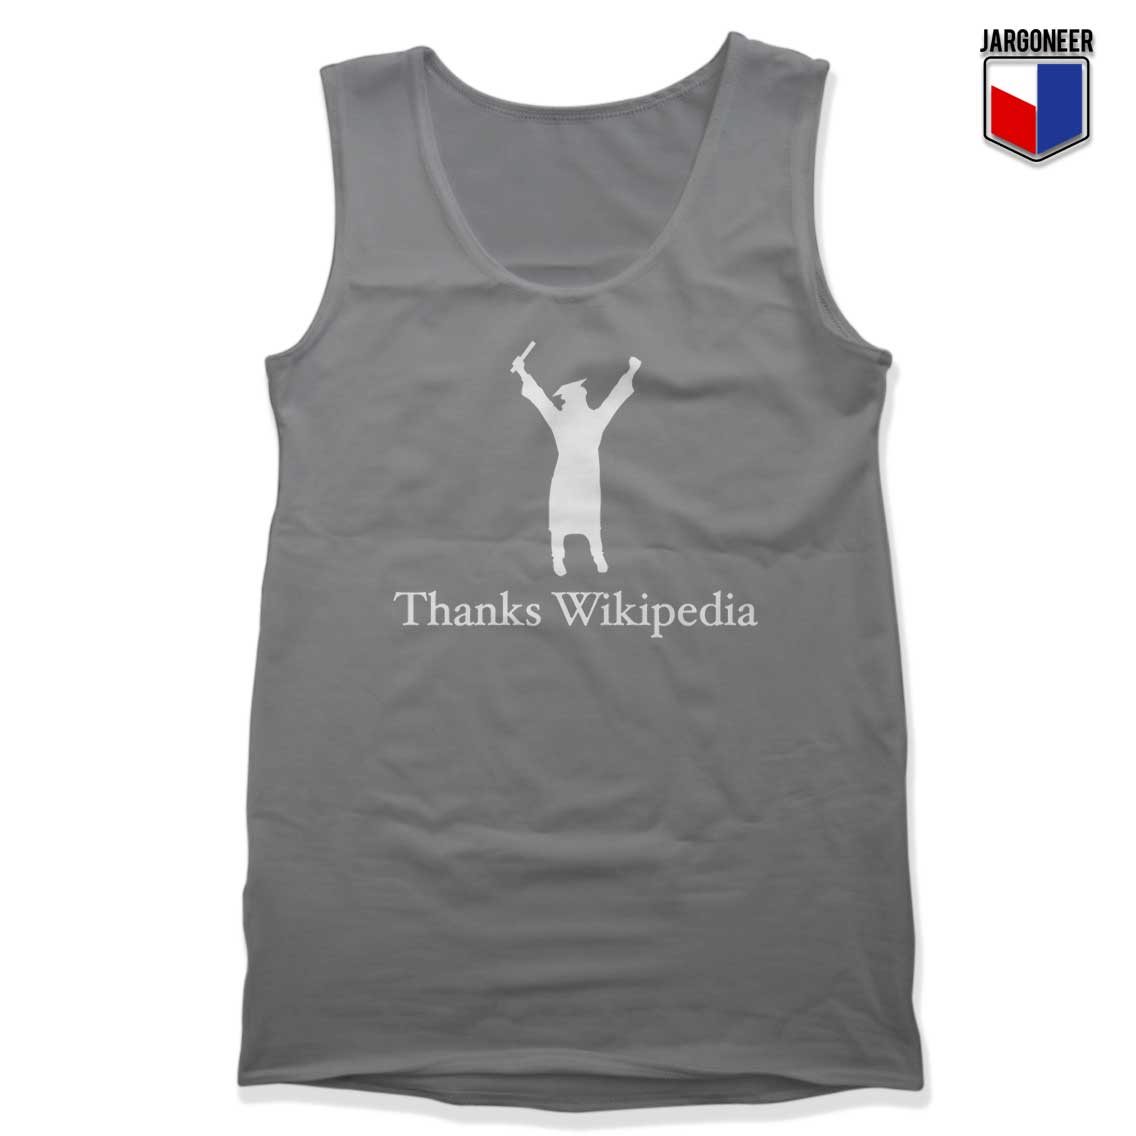 Thanks Wikipedia Gray Tank Top - Shop Unique Graphic Cool Shirt Designs